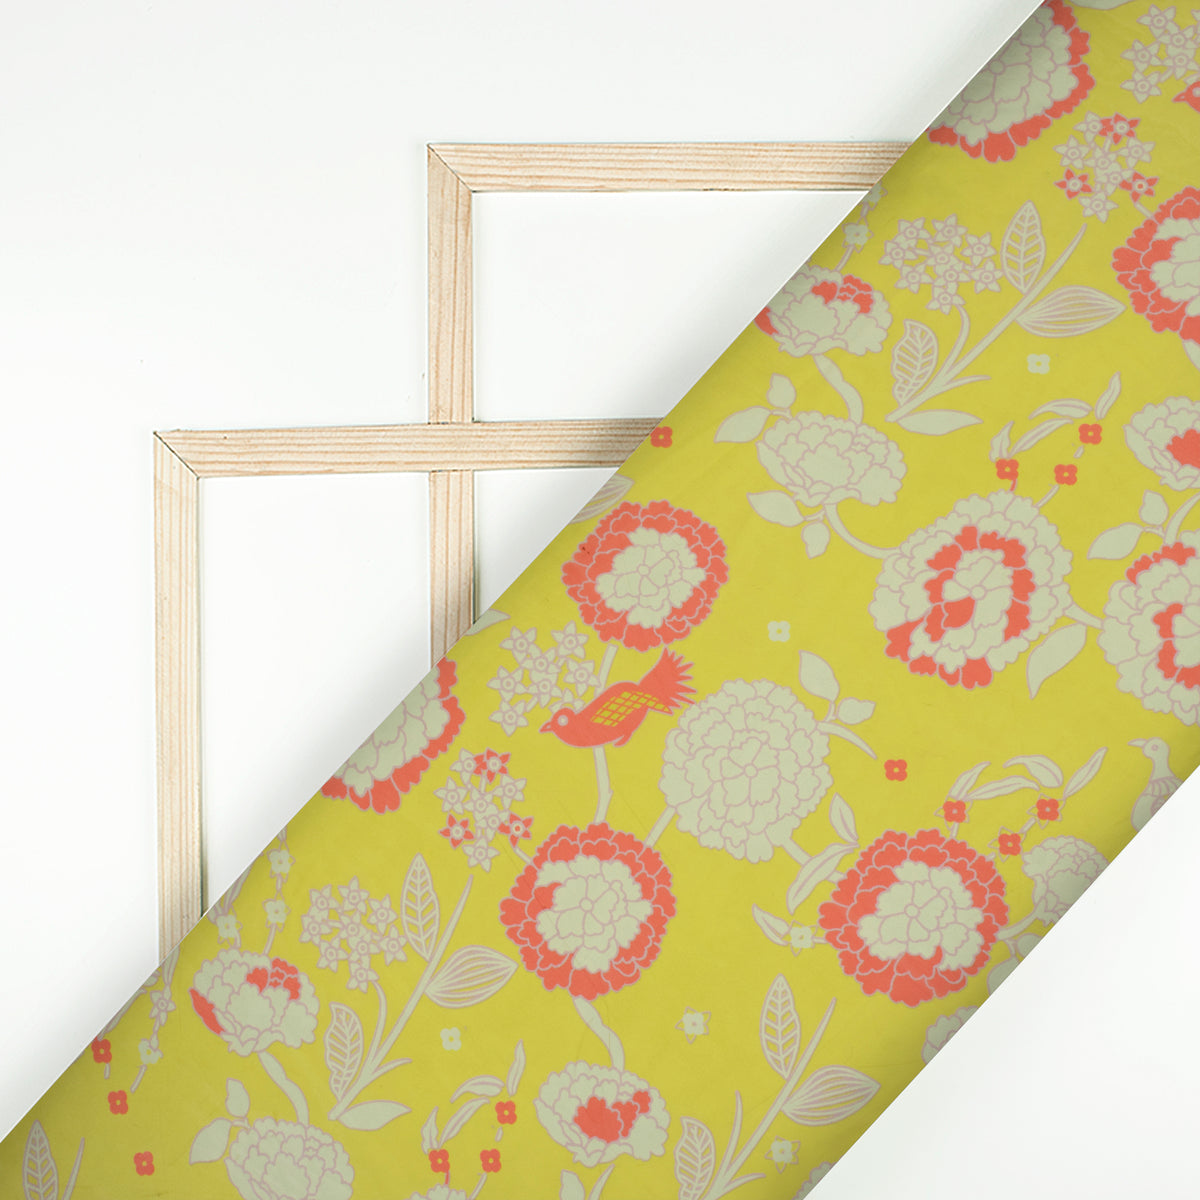 Yellow Floral Digital Print Georgette Fabric